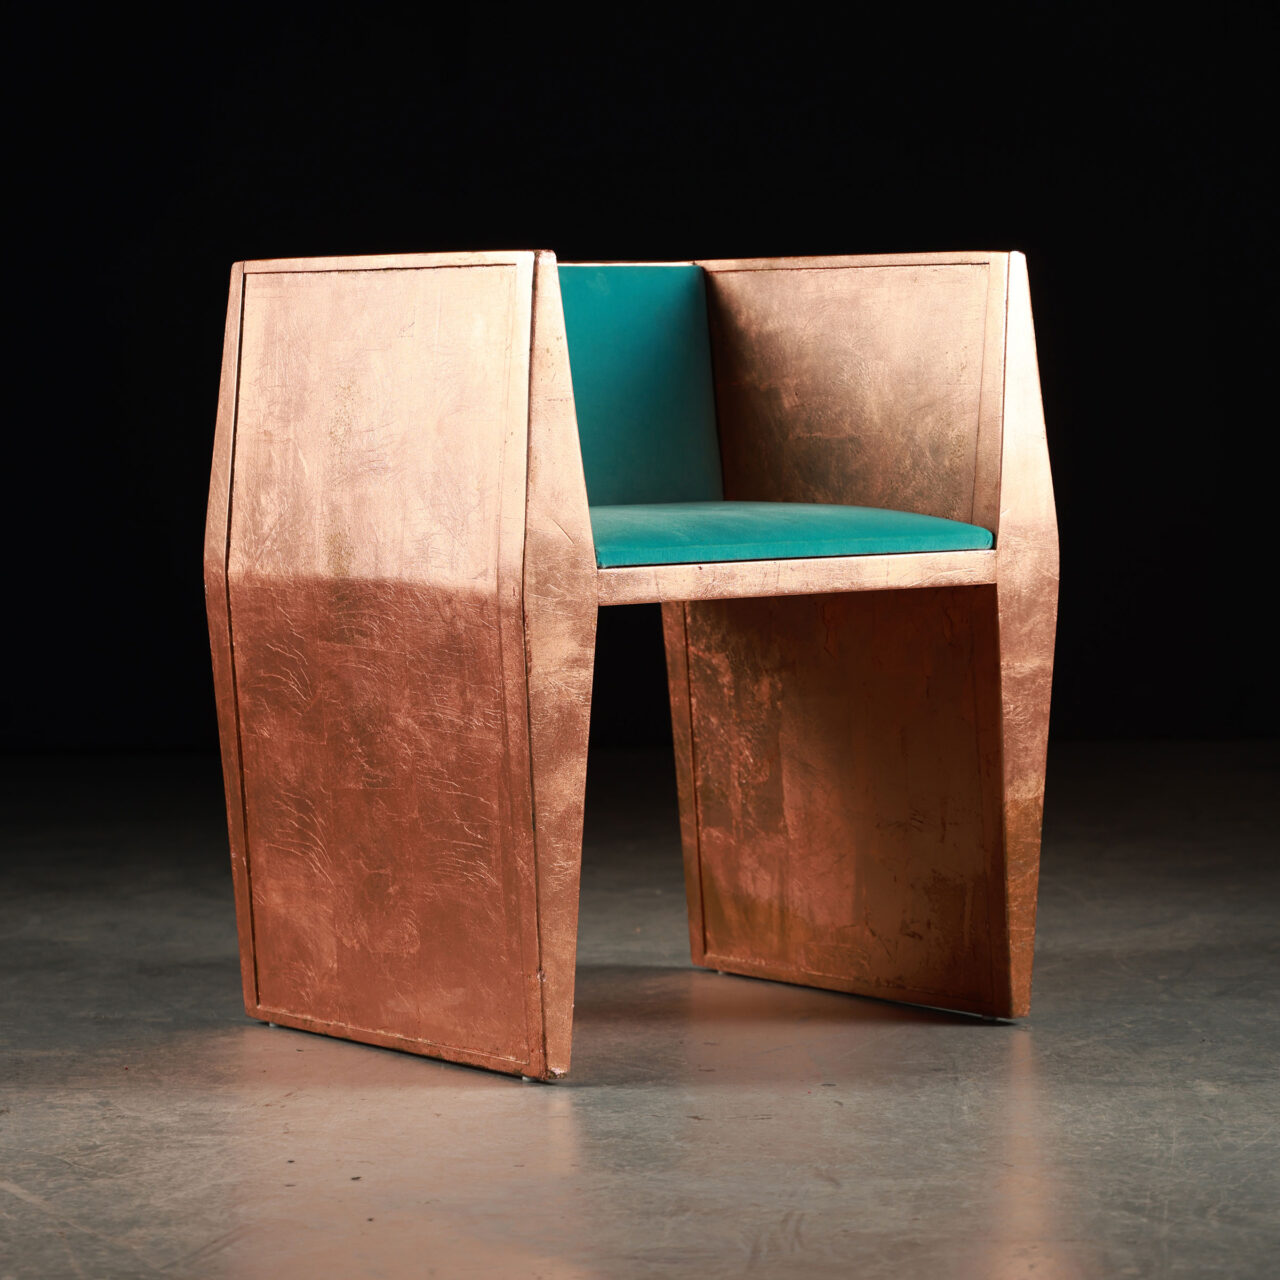 Wooden unique chairs - The SENTIENT Sapience copper chair, presented here from a fresh perspective, highlights the chair's angular construction and the rich texture of the copper. The teal cushion appears even more vibrant against the metallic sheen, emphasizing the chair's fusion of comfort and avant-garde style.